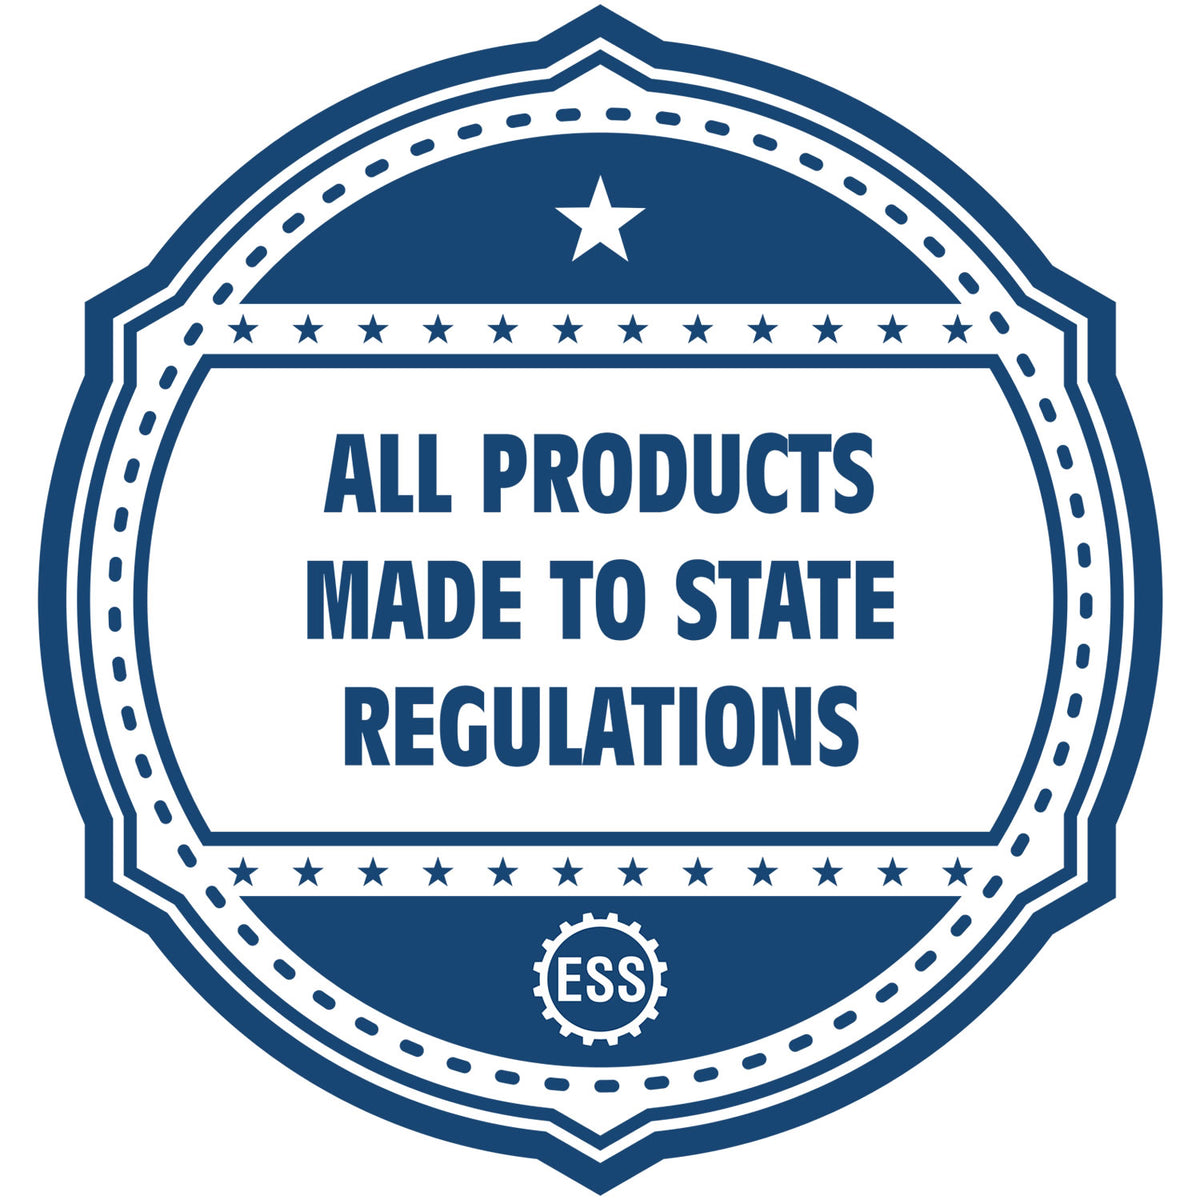 An icon or badge element for the Heavy-Duty Vermont Rectangular Notary Stamp showing that this product is made in compliance with state regulations.